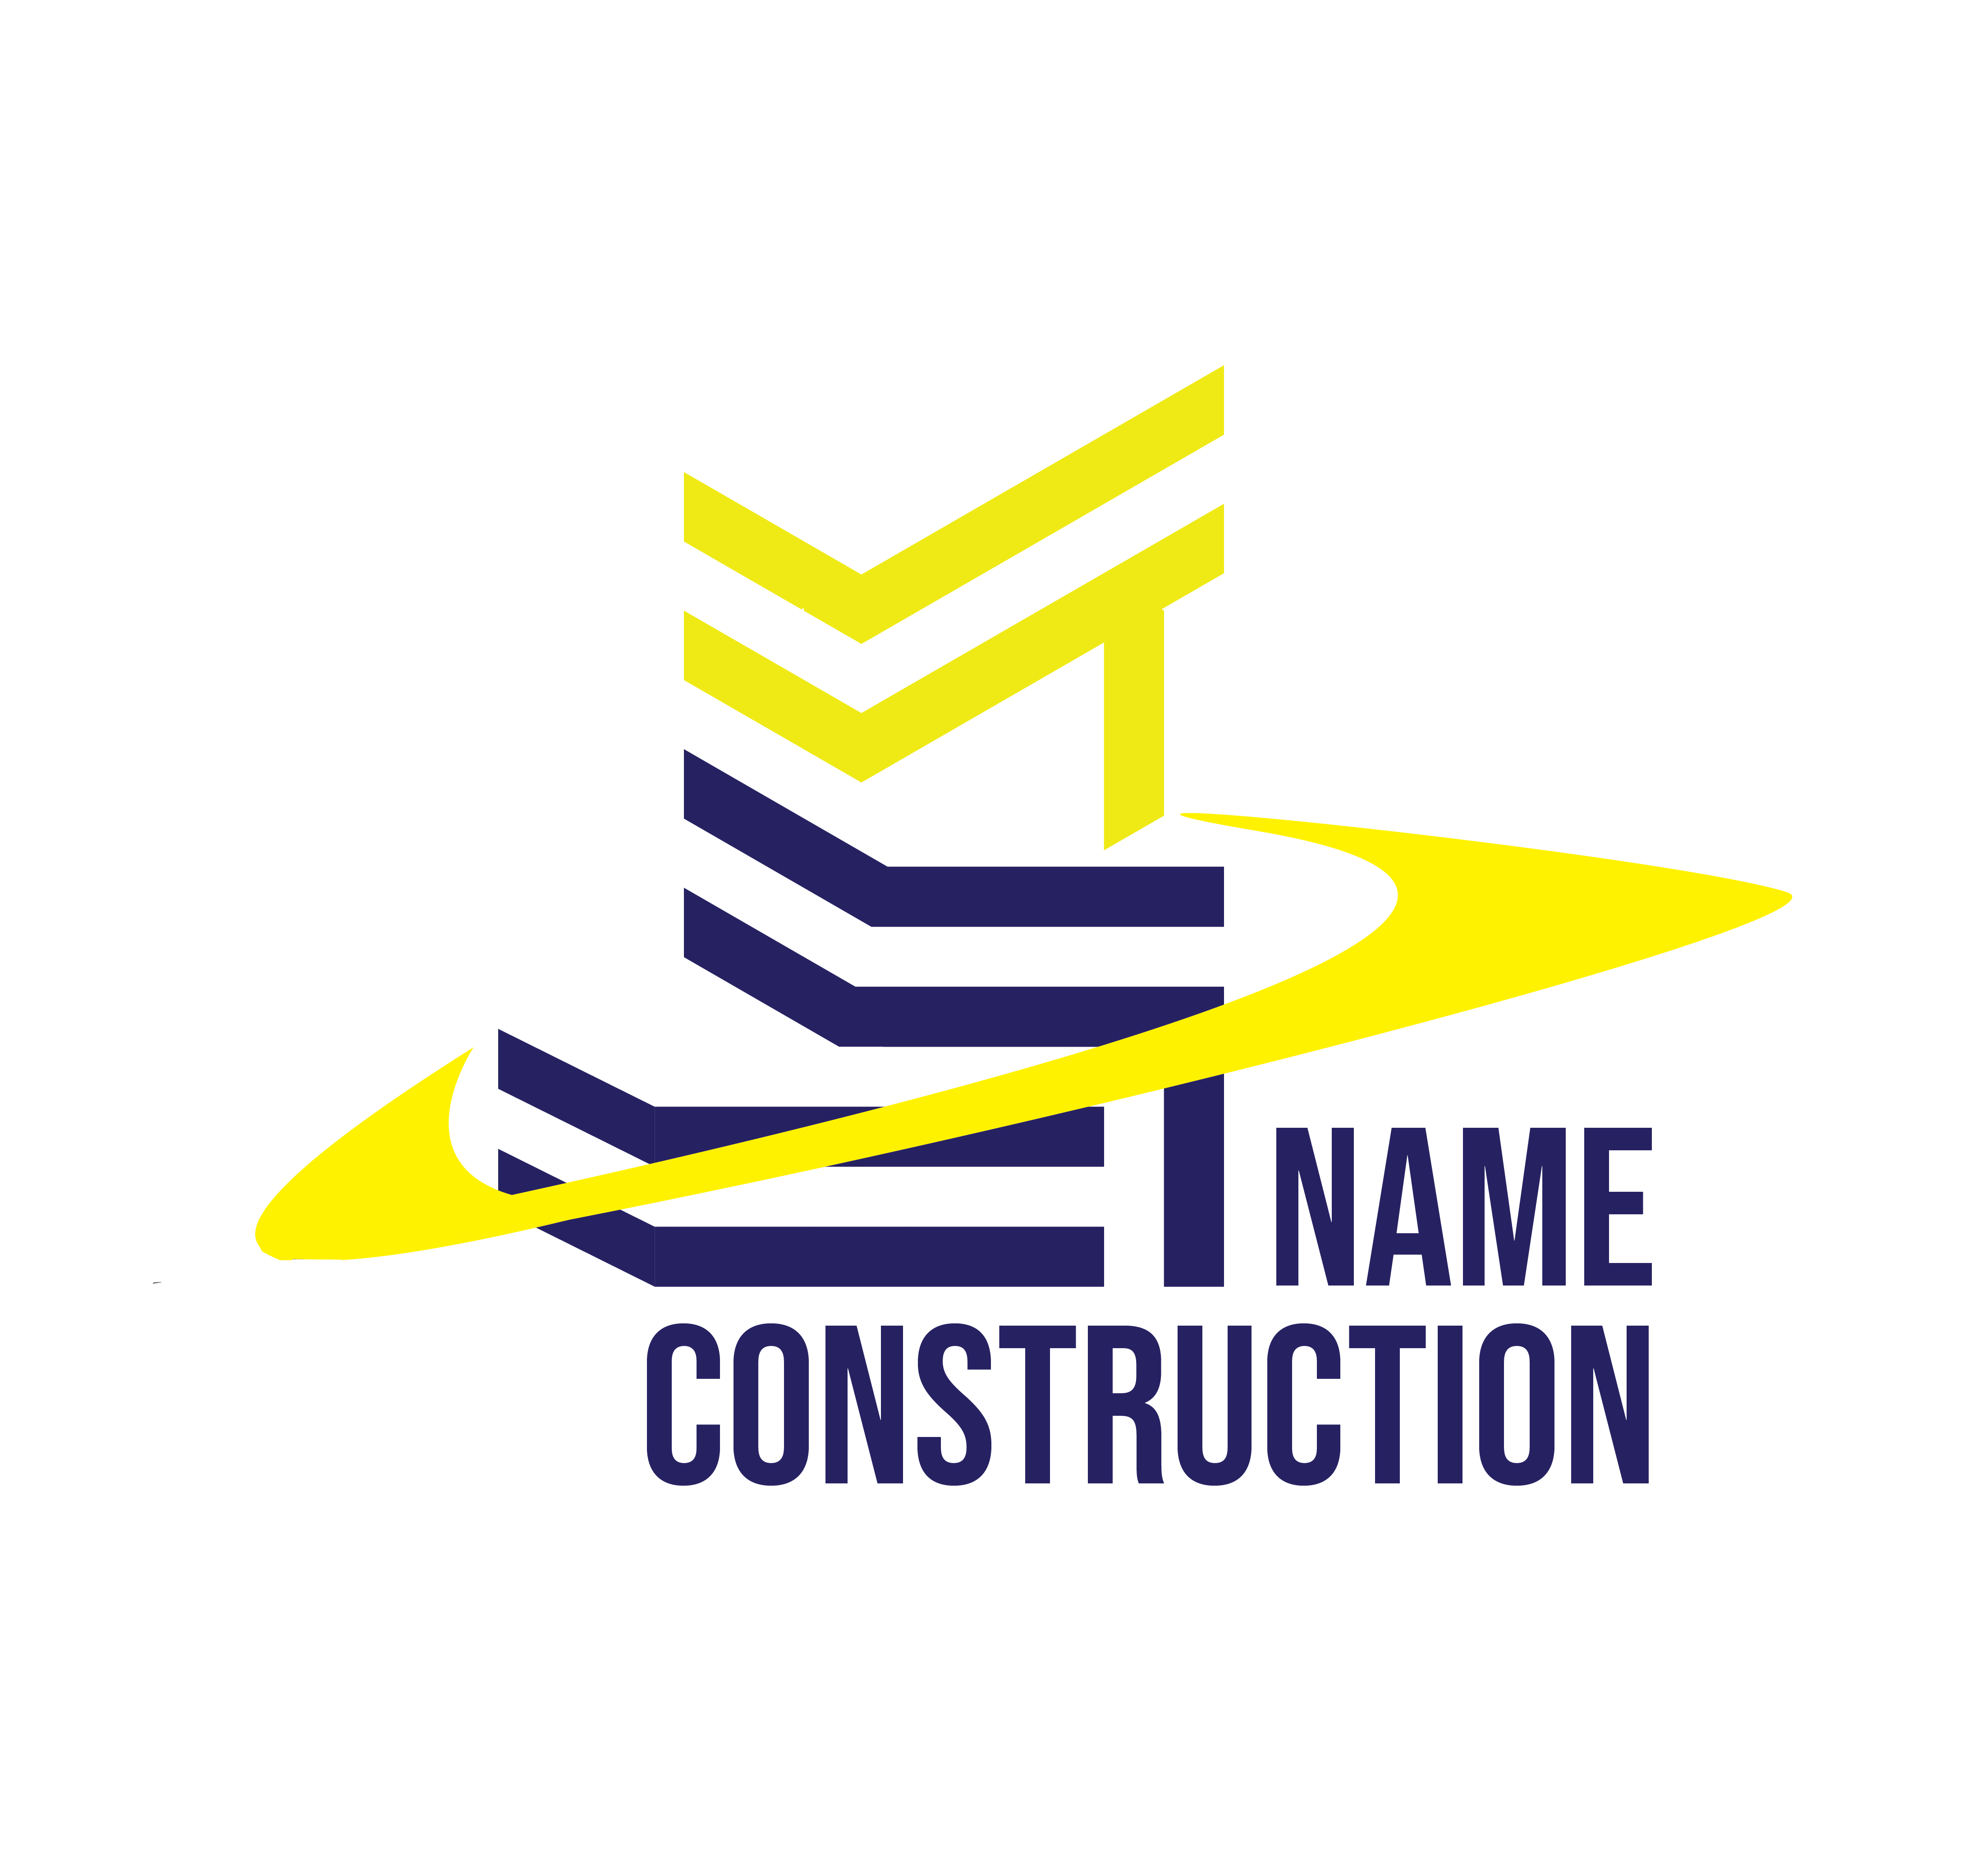 Construction Logo Template cover image.